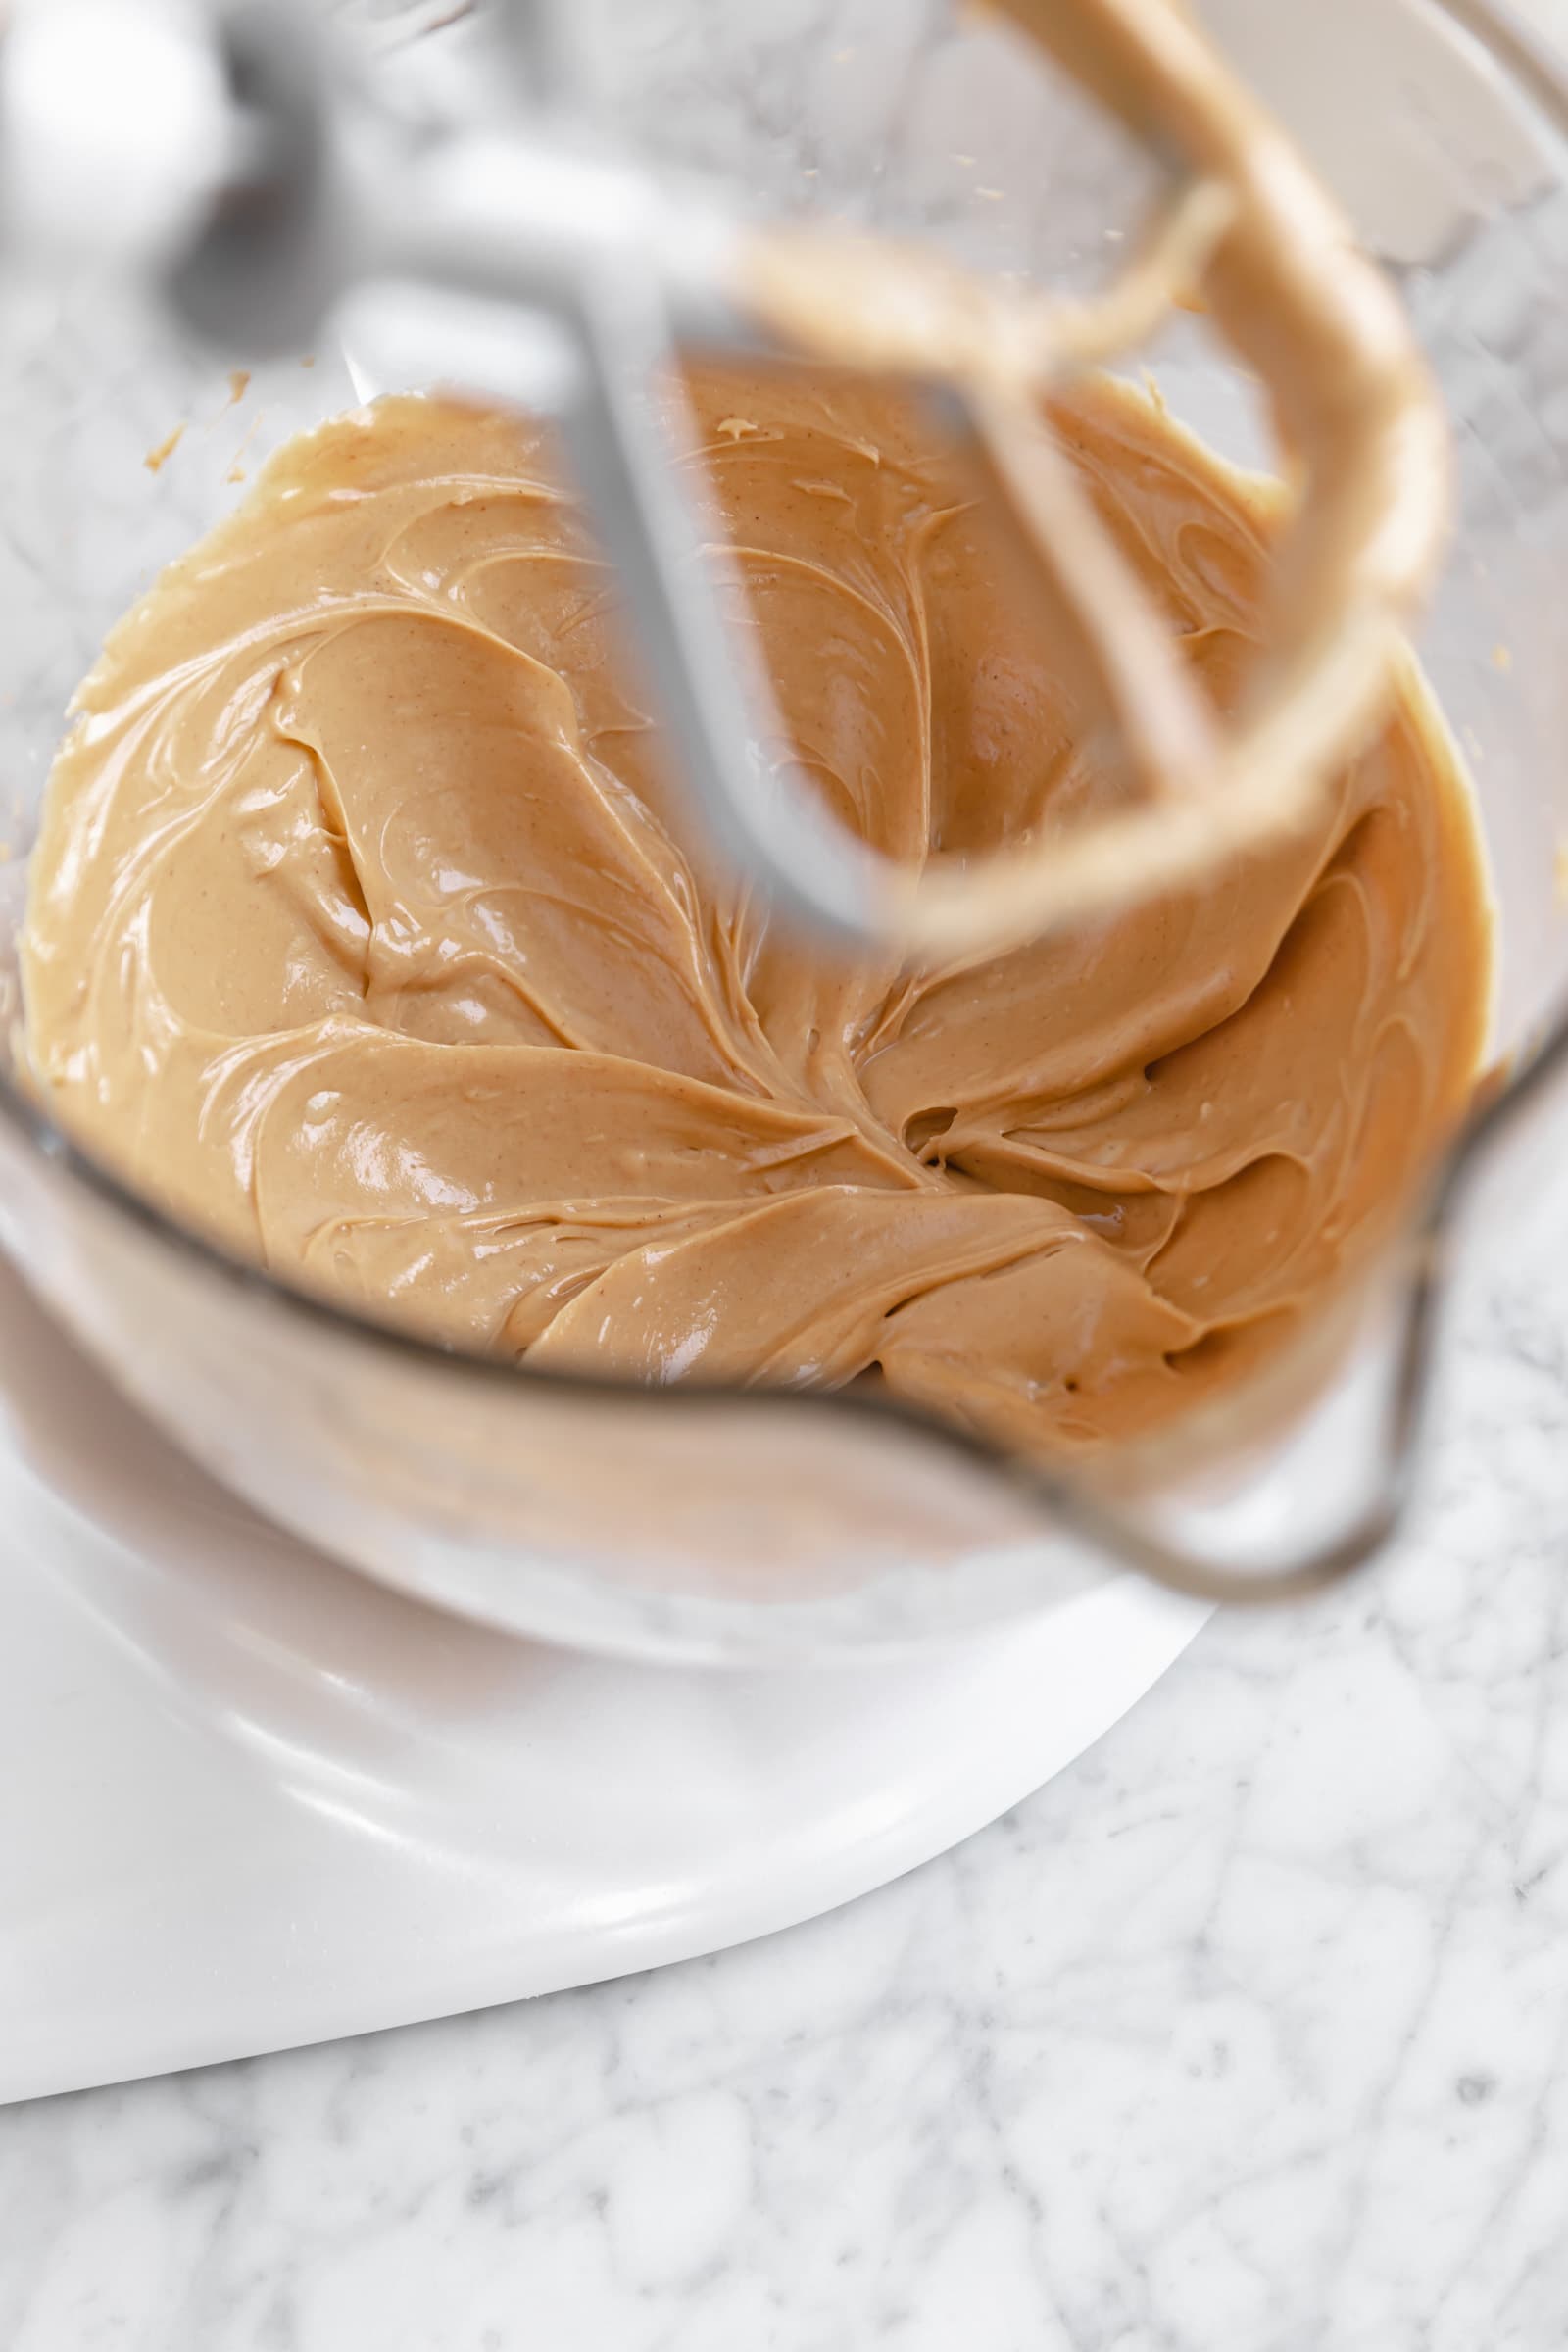 Peanut butter frosting